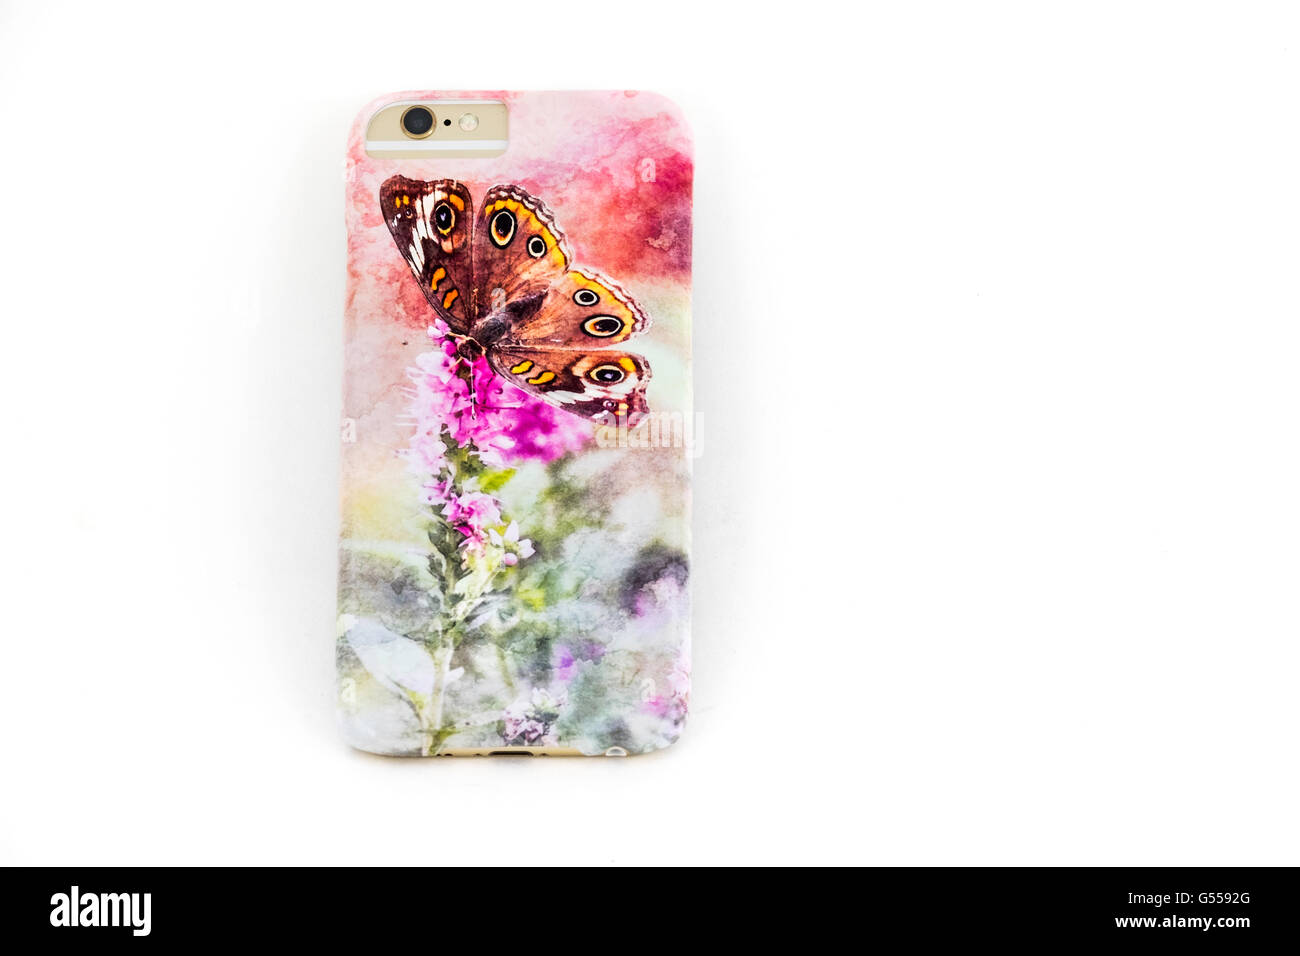 An artistic owner-designed personalized phone case for the iPhone 6s. Cutout. Stock Photo